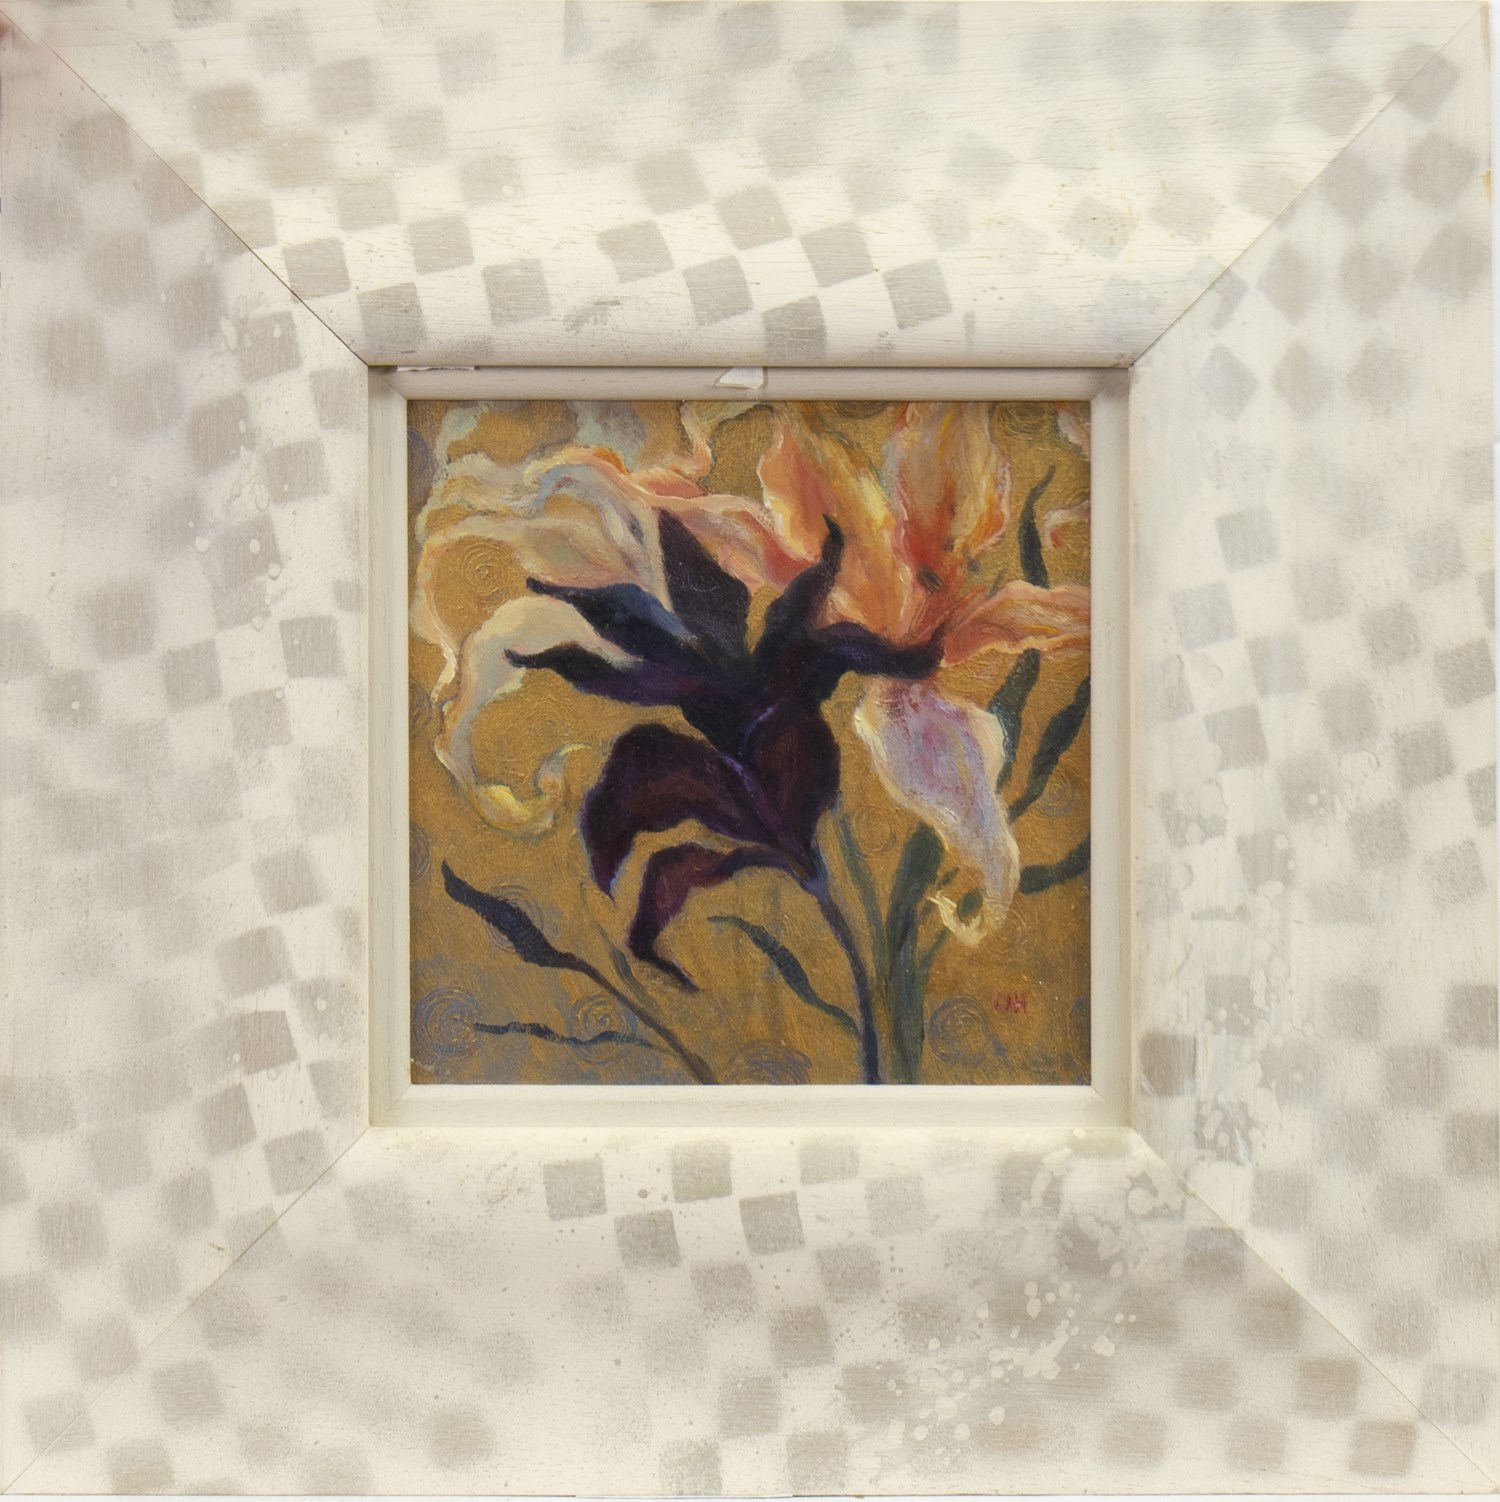 LILLIES ON GOLD, A MIXED MEDIA BY LAURA HUNTER - Image 2 of 2